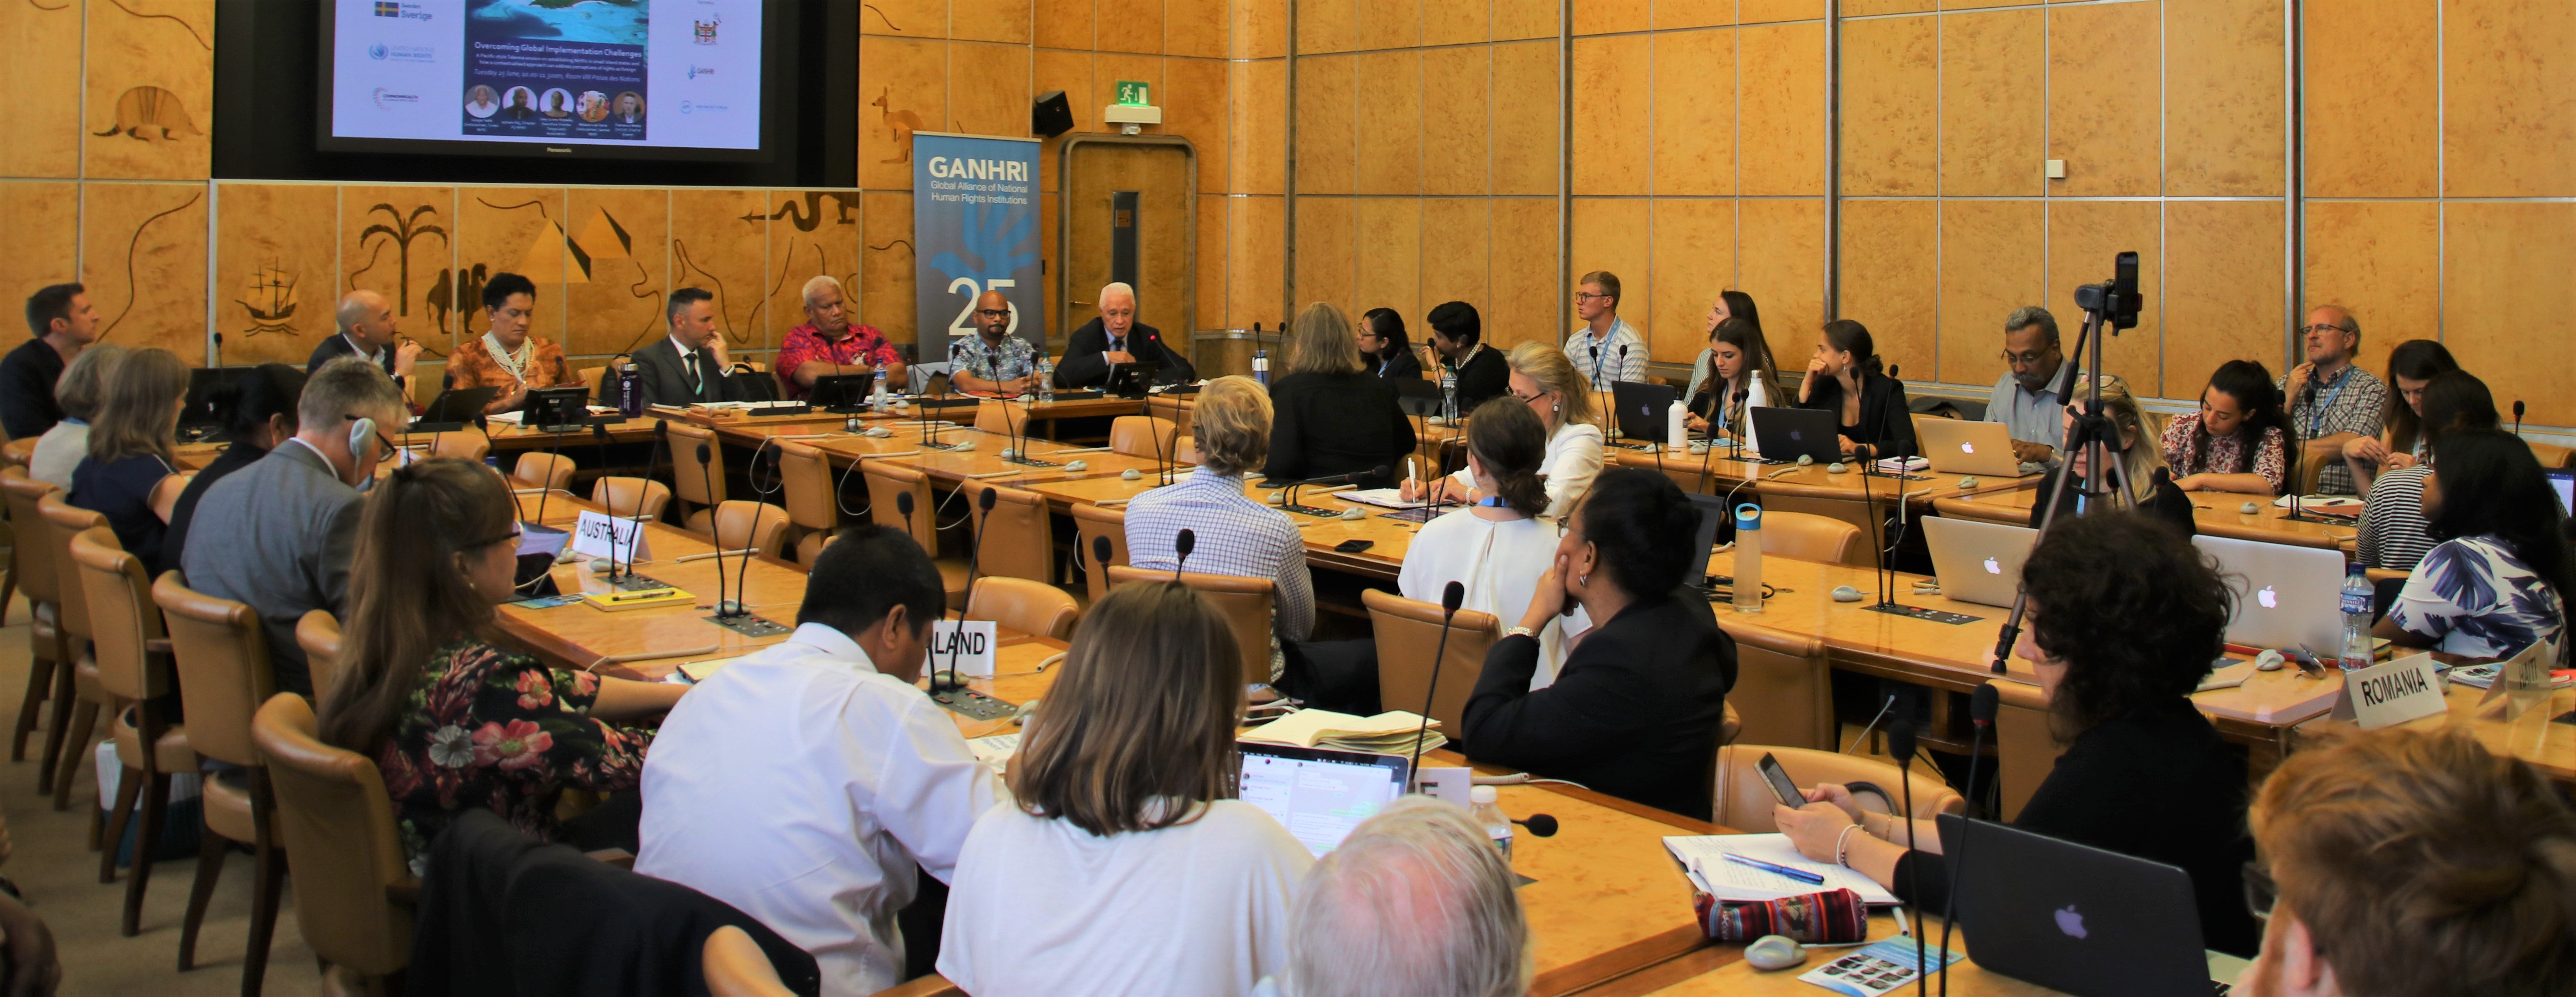 Participants at the Pacific side event at the Human Rights Council in Geneva.JPG